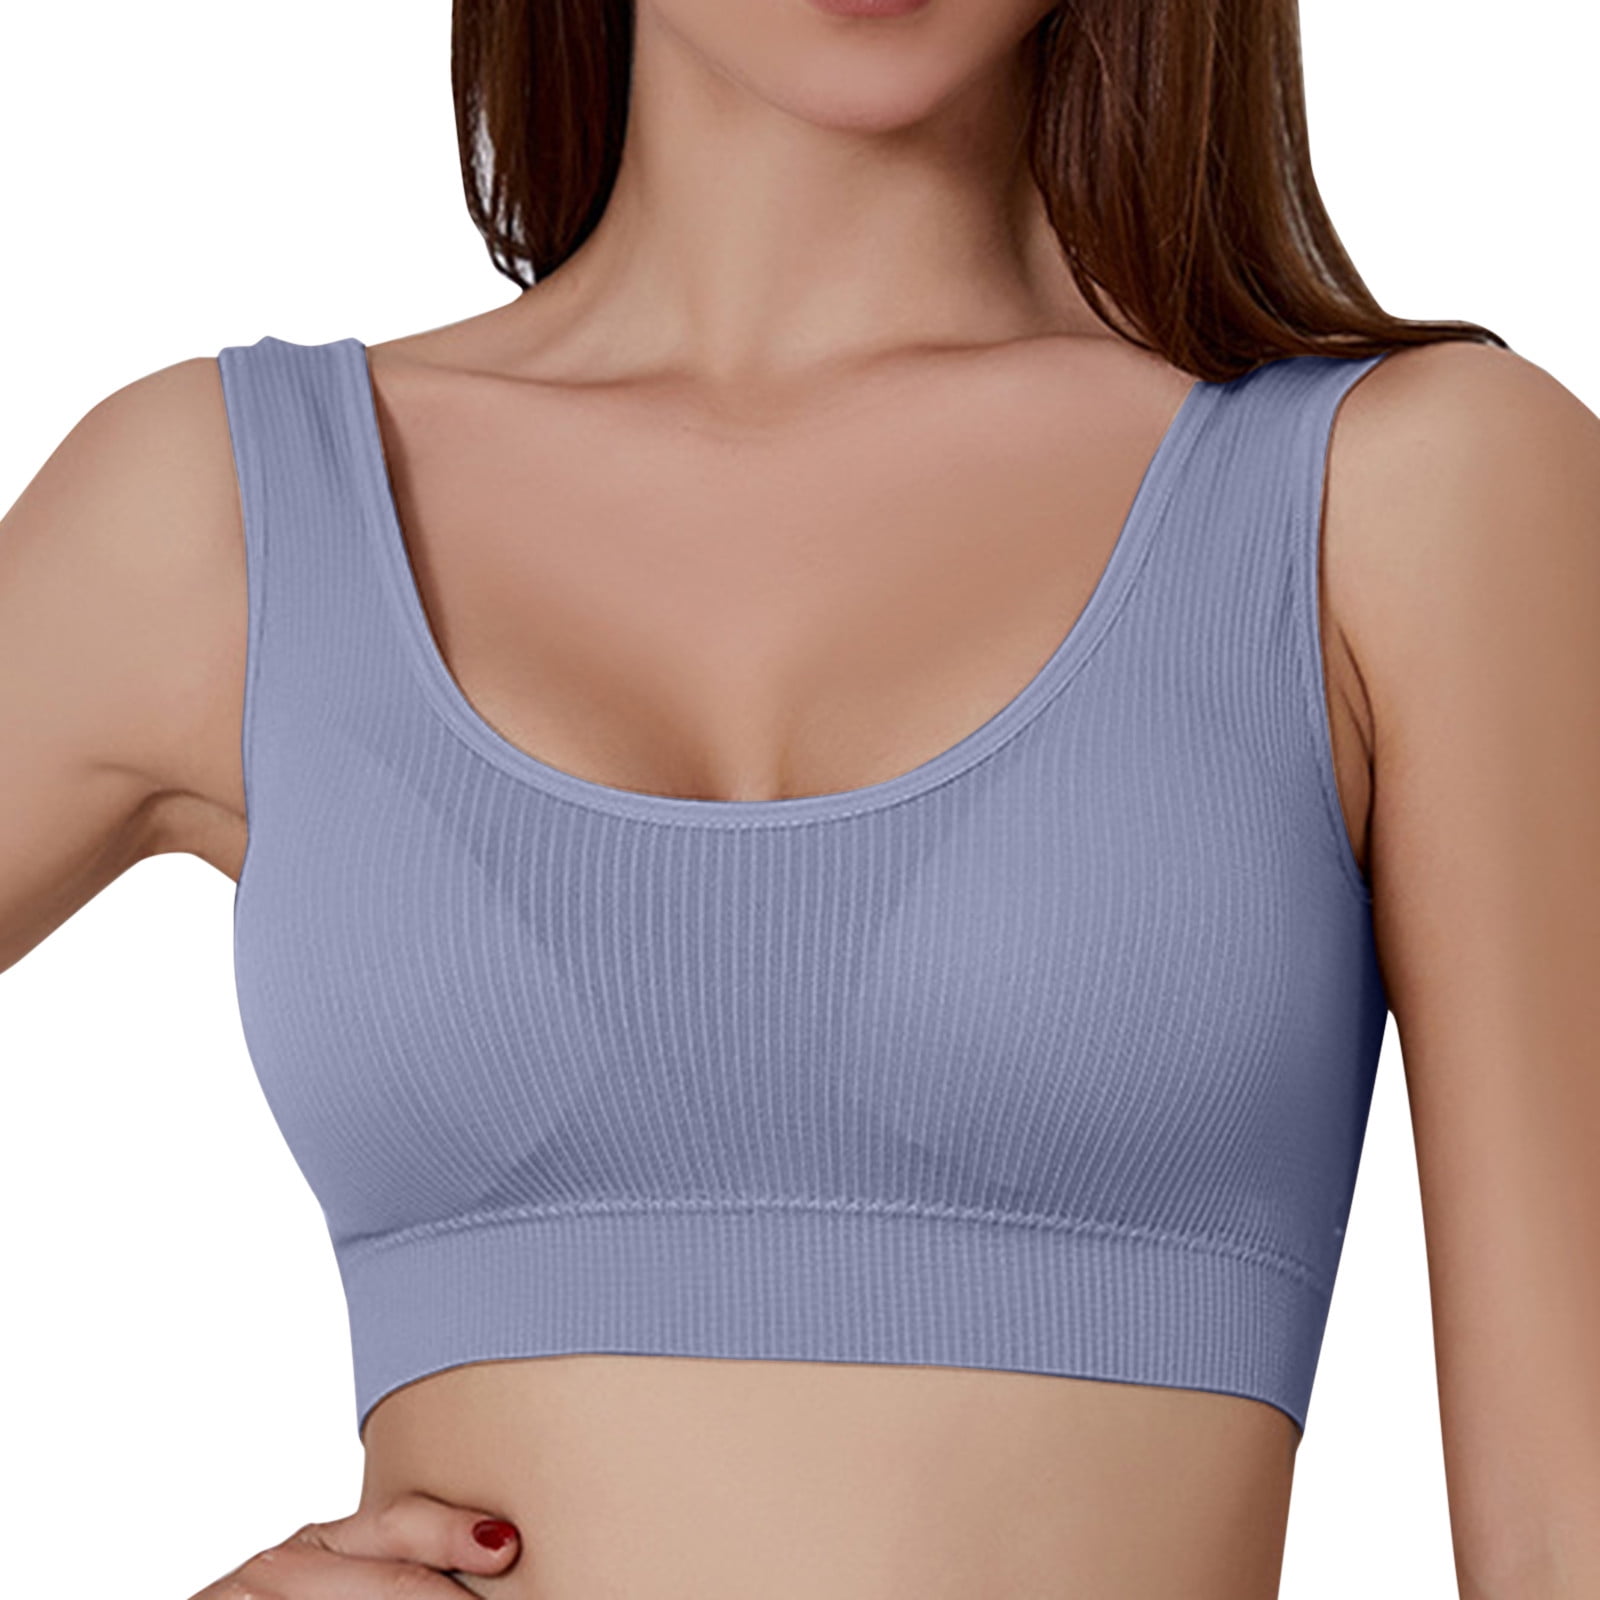 CAICJ98 Lingerie for Women Steel Ring Front Thin Women Bra Full Plus Cup  Button Breathable Gathers Underwear No Size Comfort Bra Grey,XL 